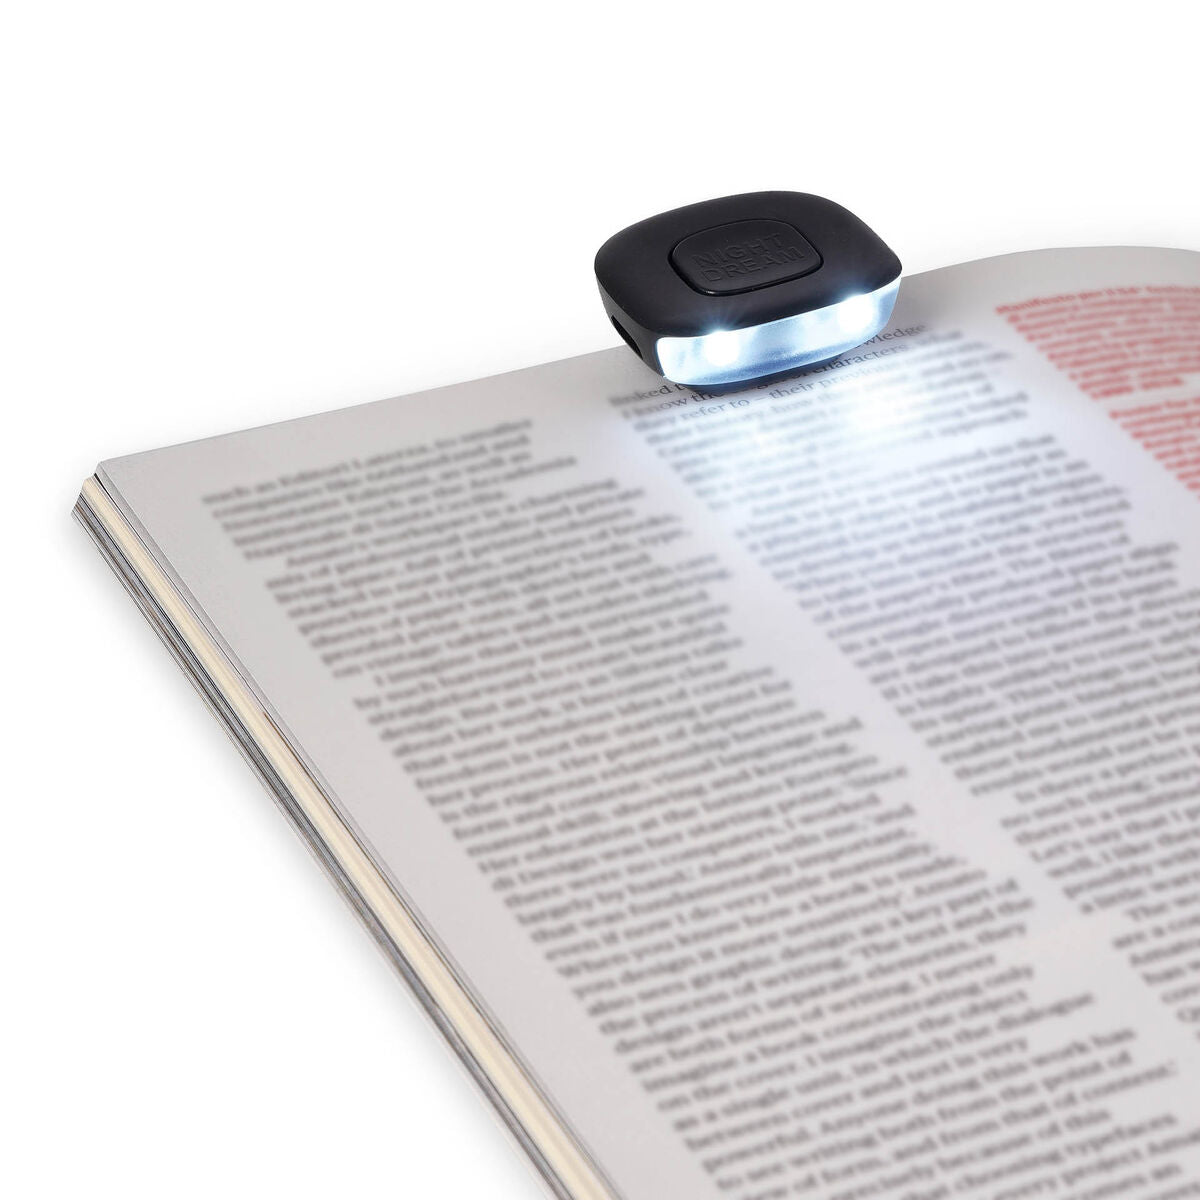 LED Book Light- USB Rechargeable